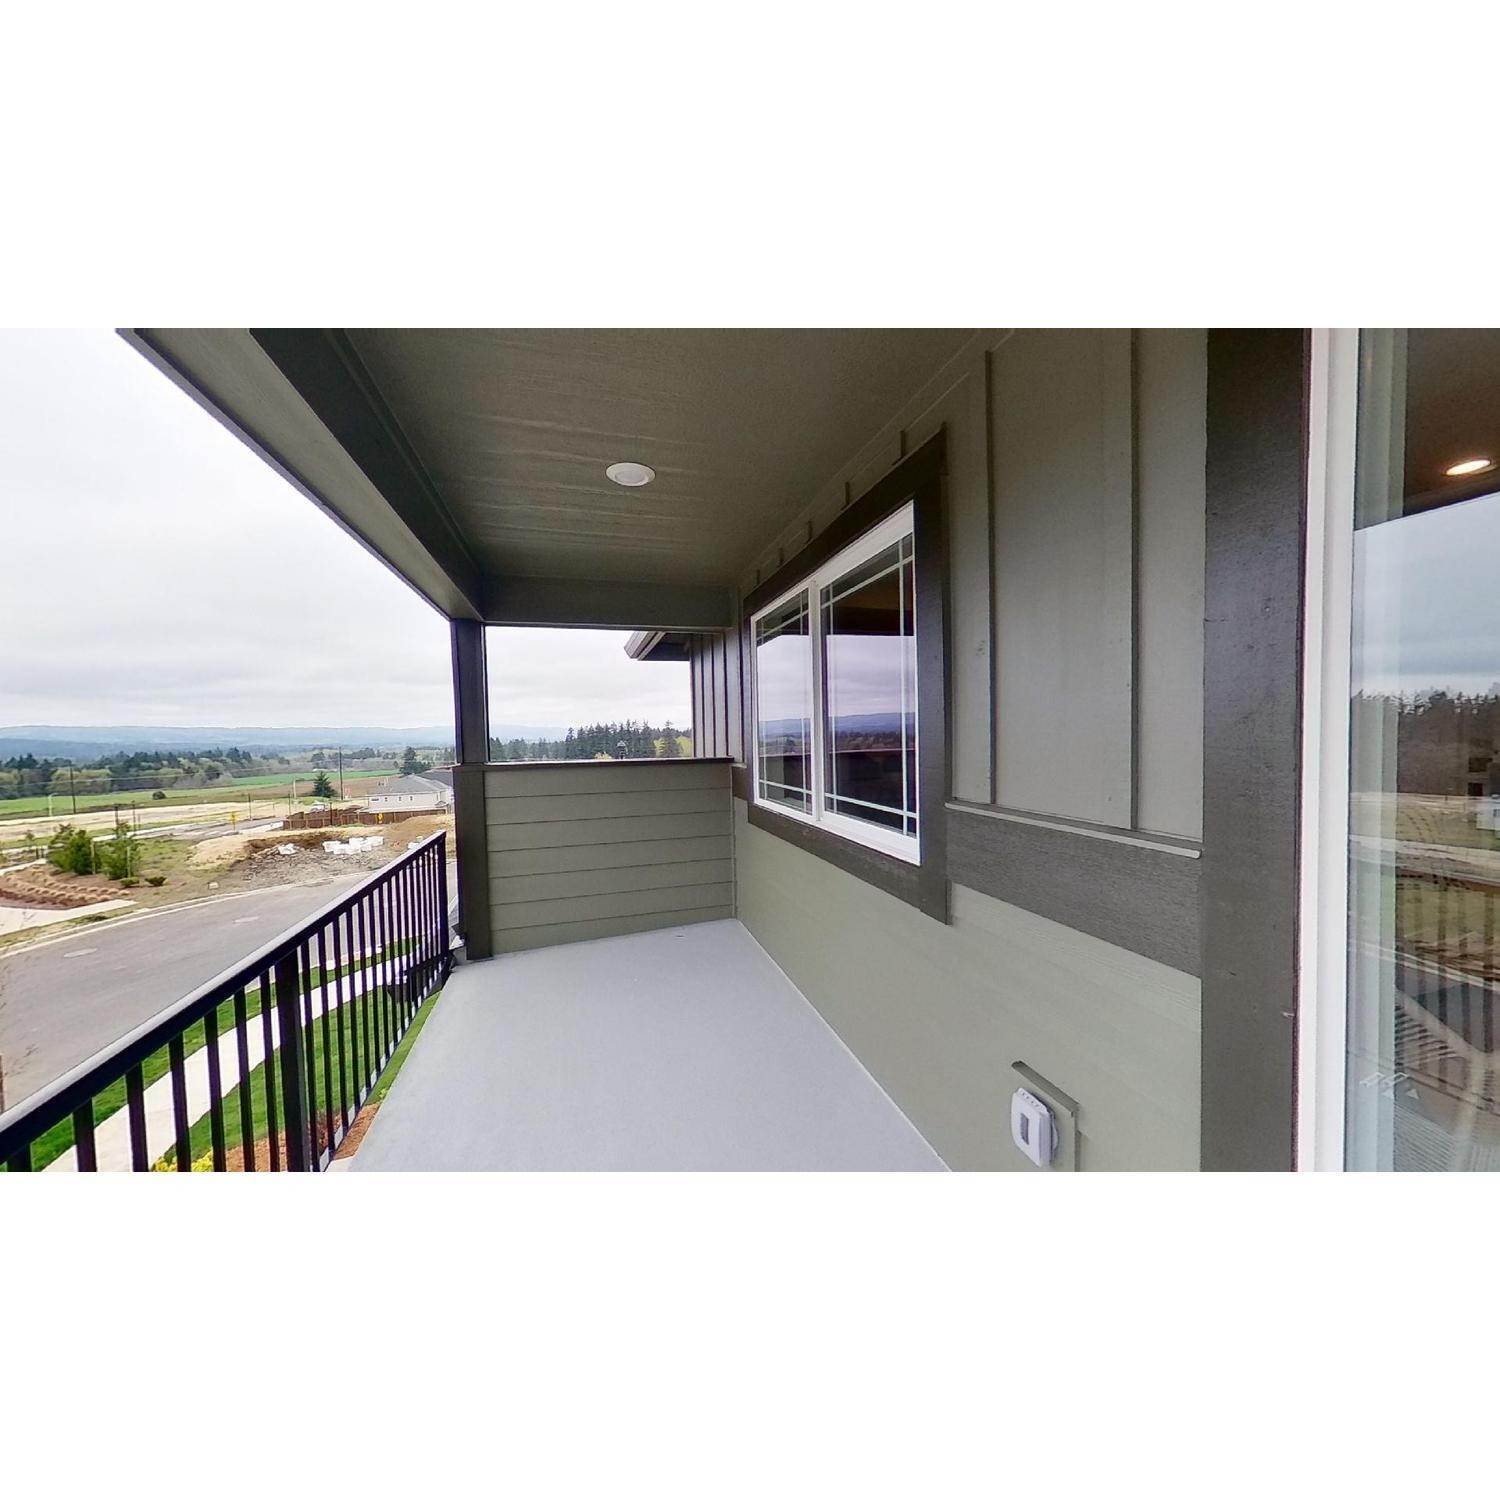 36. Innovate Condominiums building at 16786 SW Leaf Lane, Tigard, OR 97224